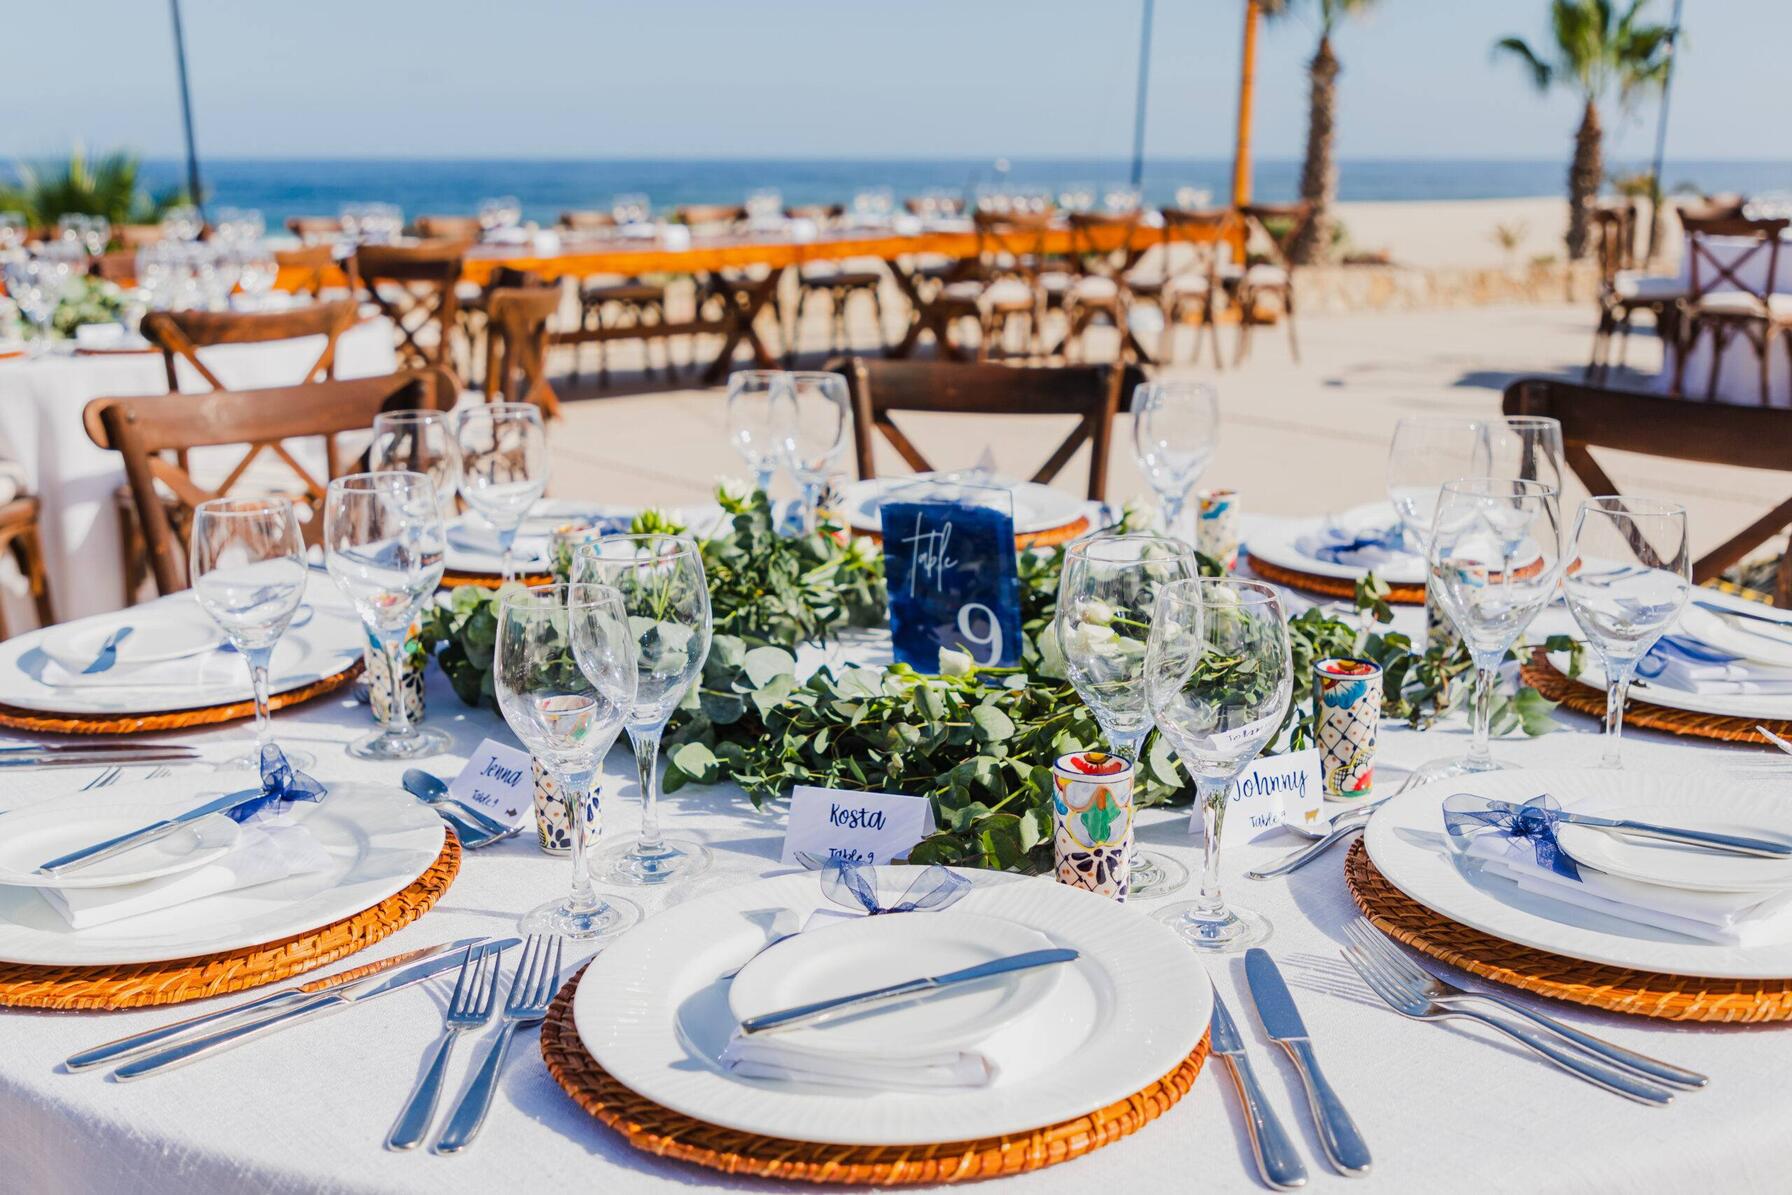 picrture of the table with dishes and the sea view